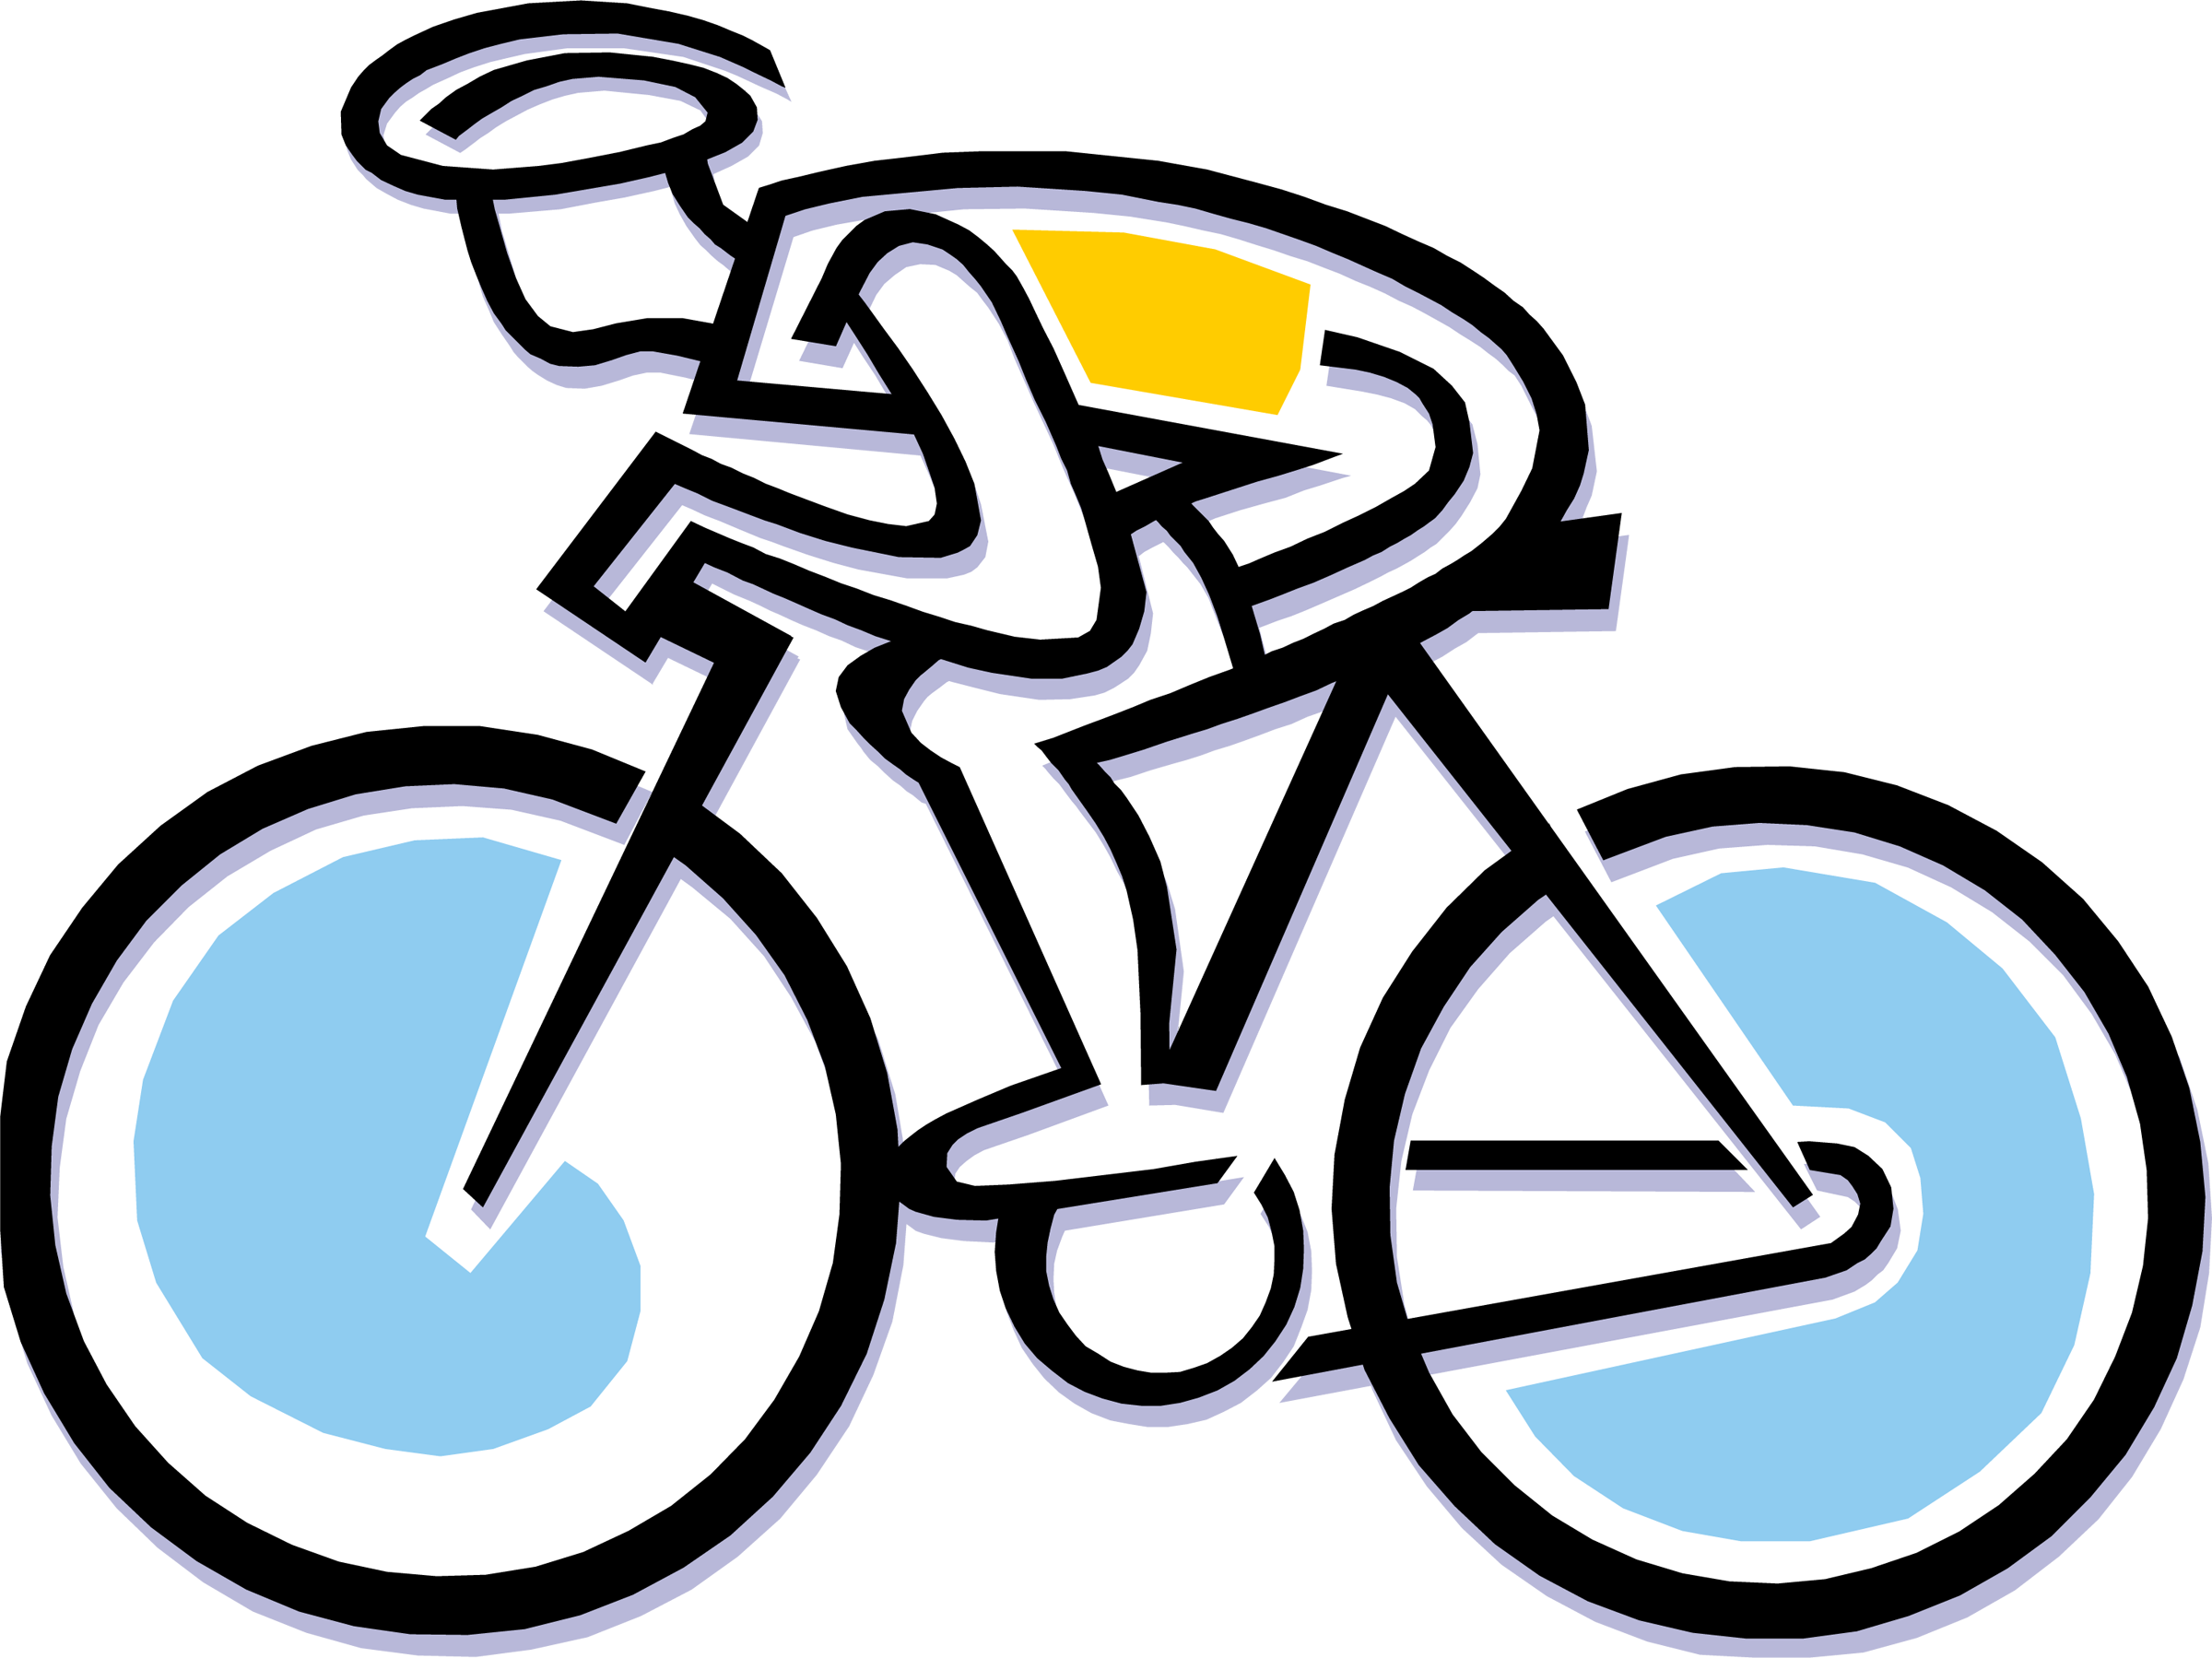 clipart bicycle cycler